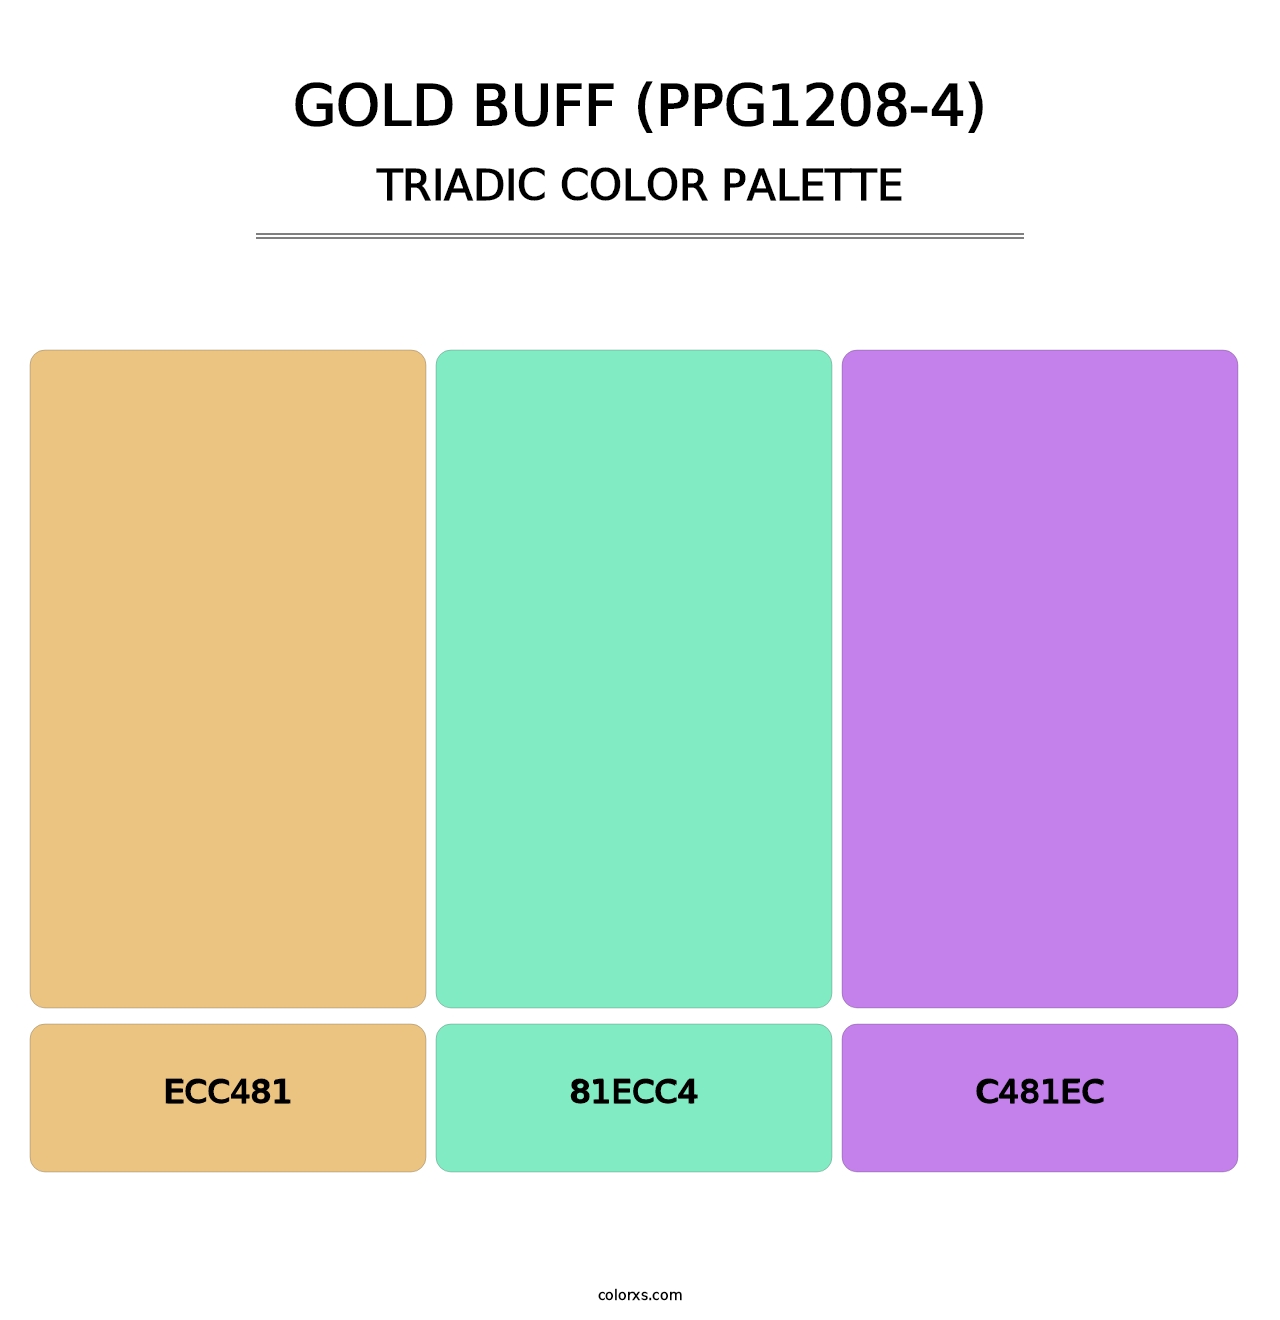 Gold Buff (PPG1208-4) - Triadic Color Palette